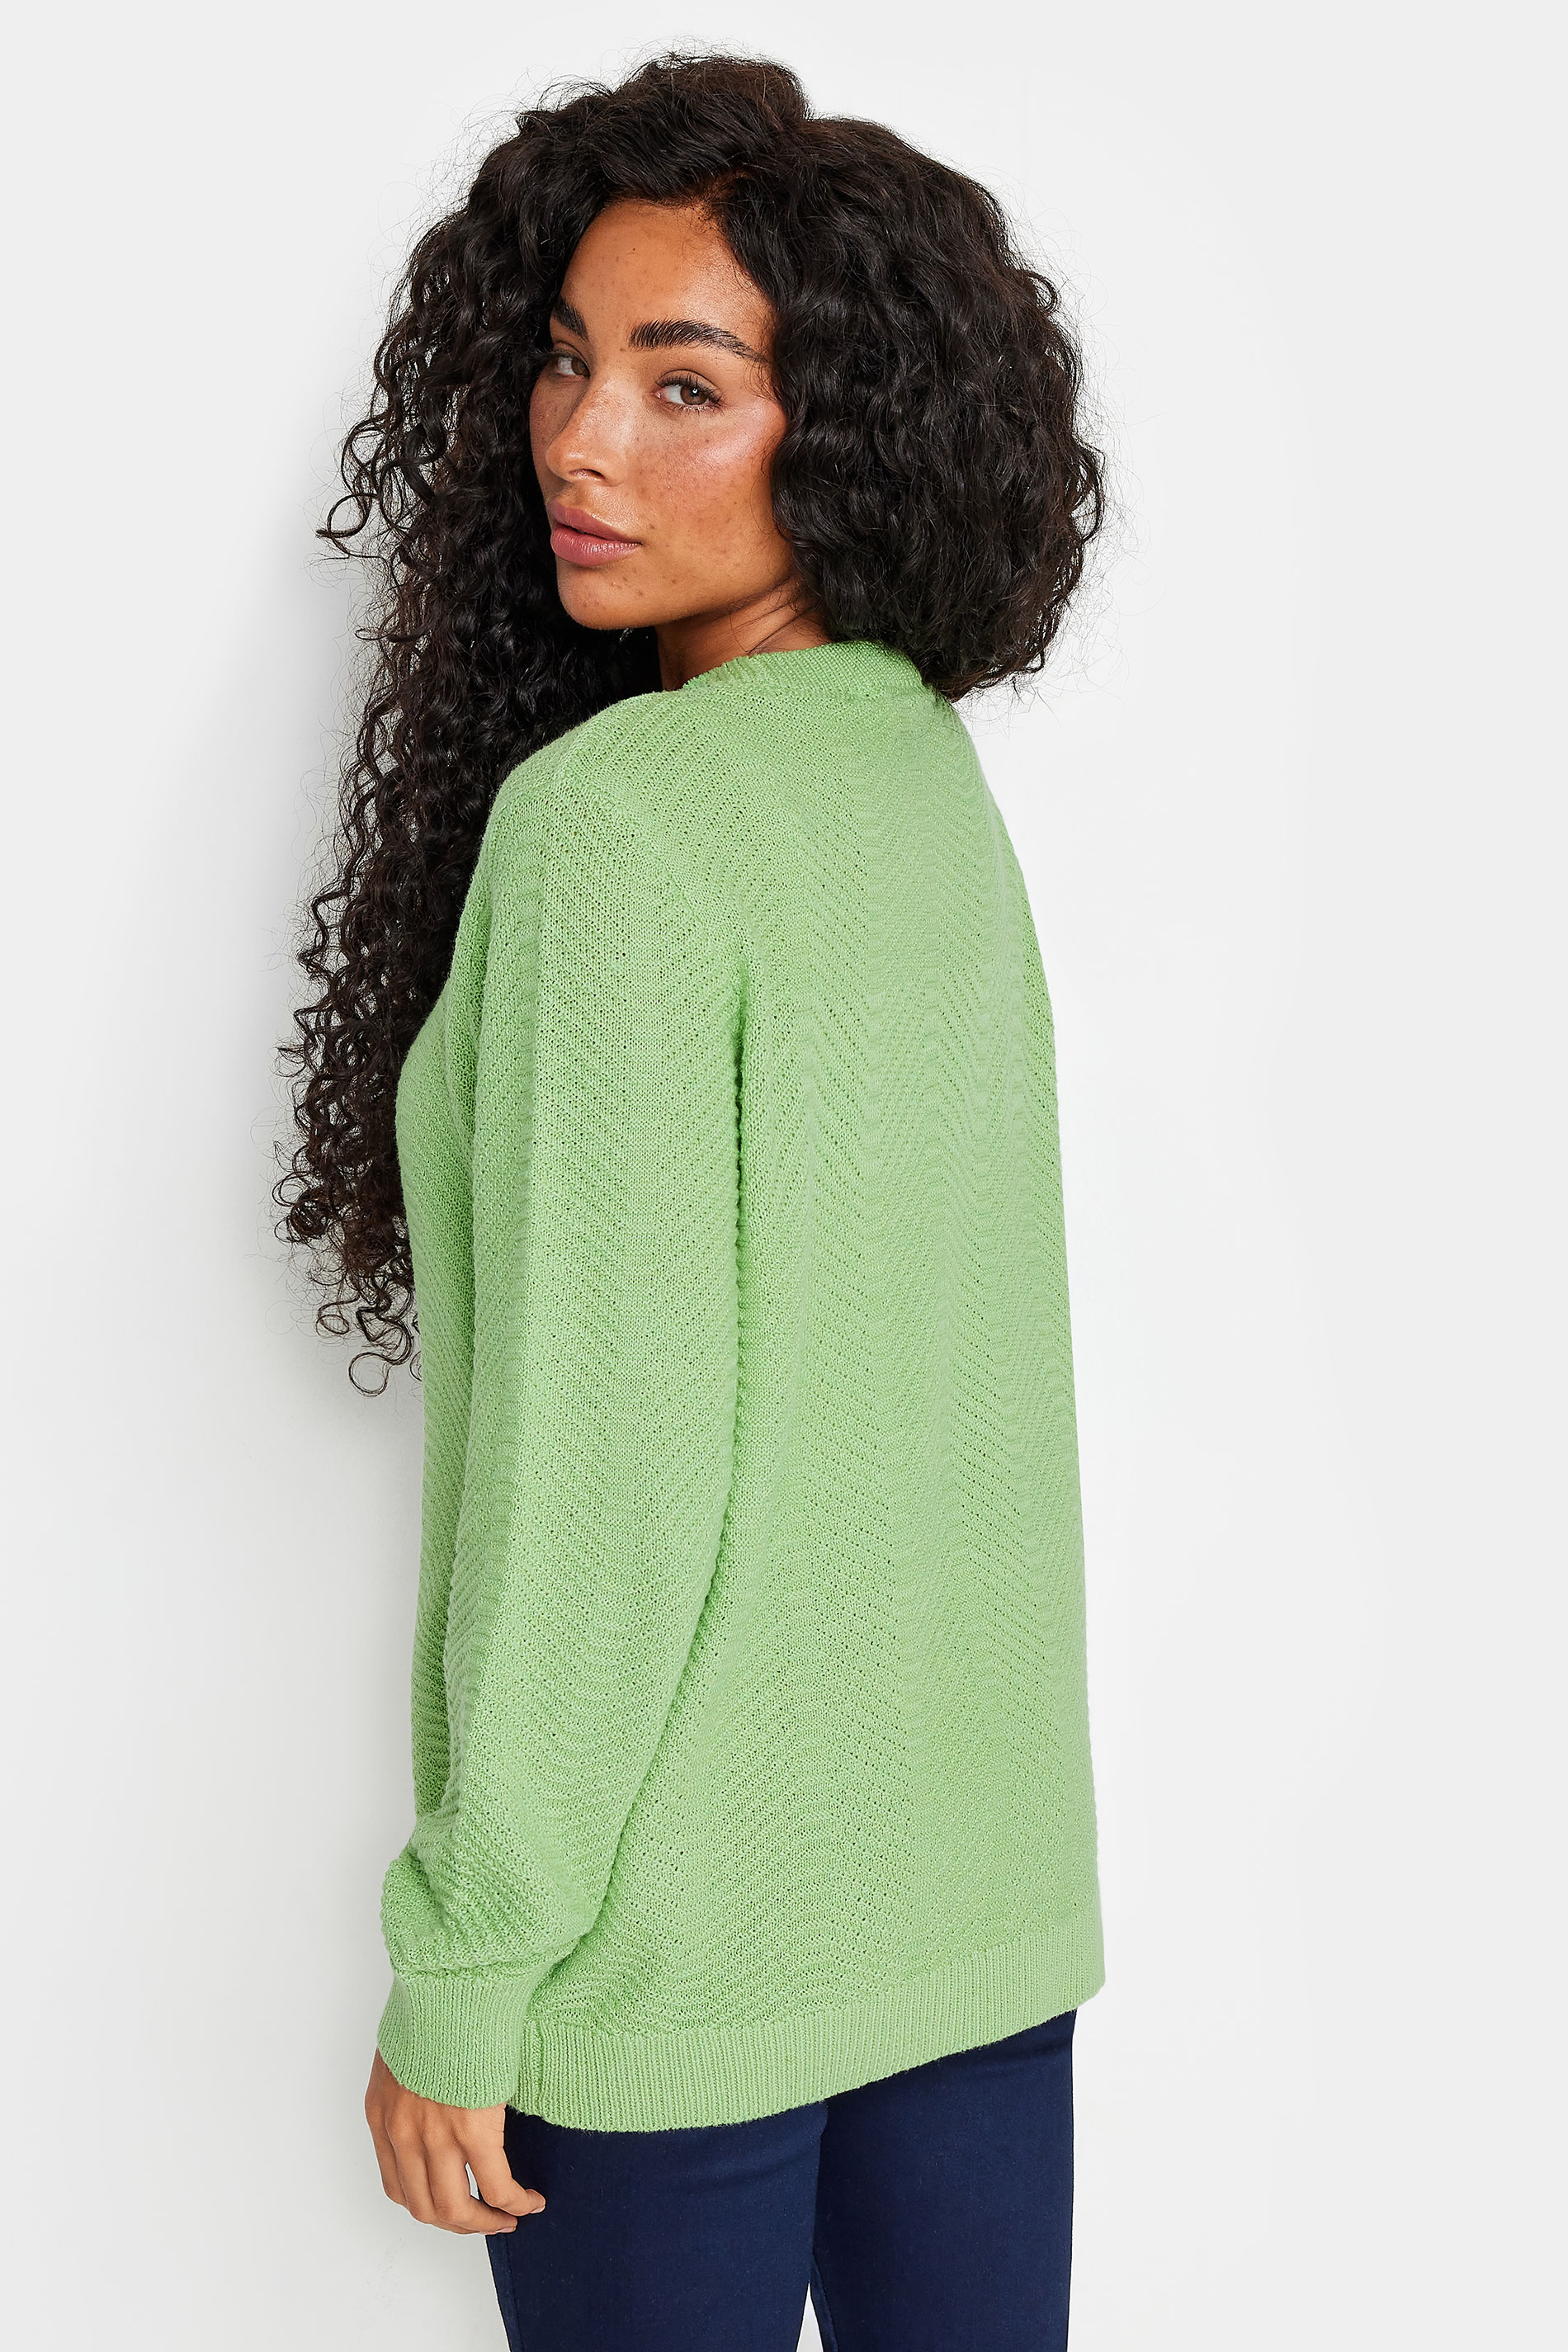 M&Co Petite Sage Green Ribbed Knit Jumper | M&Co 3